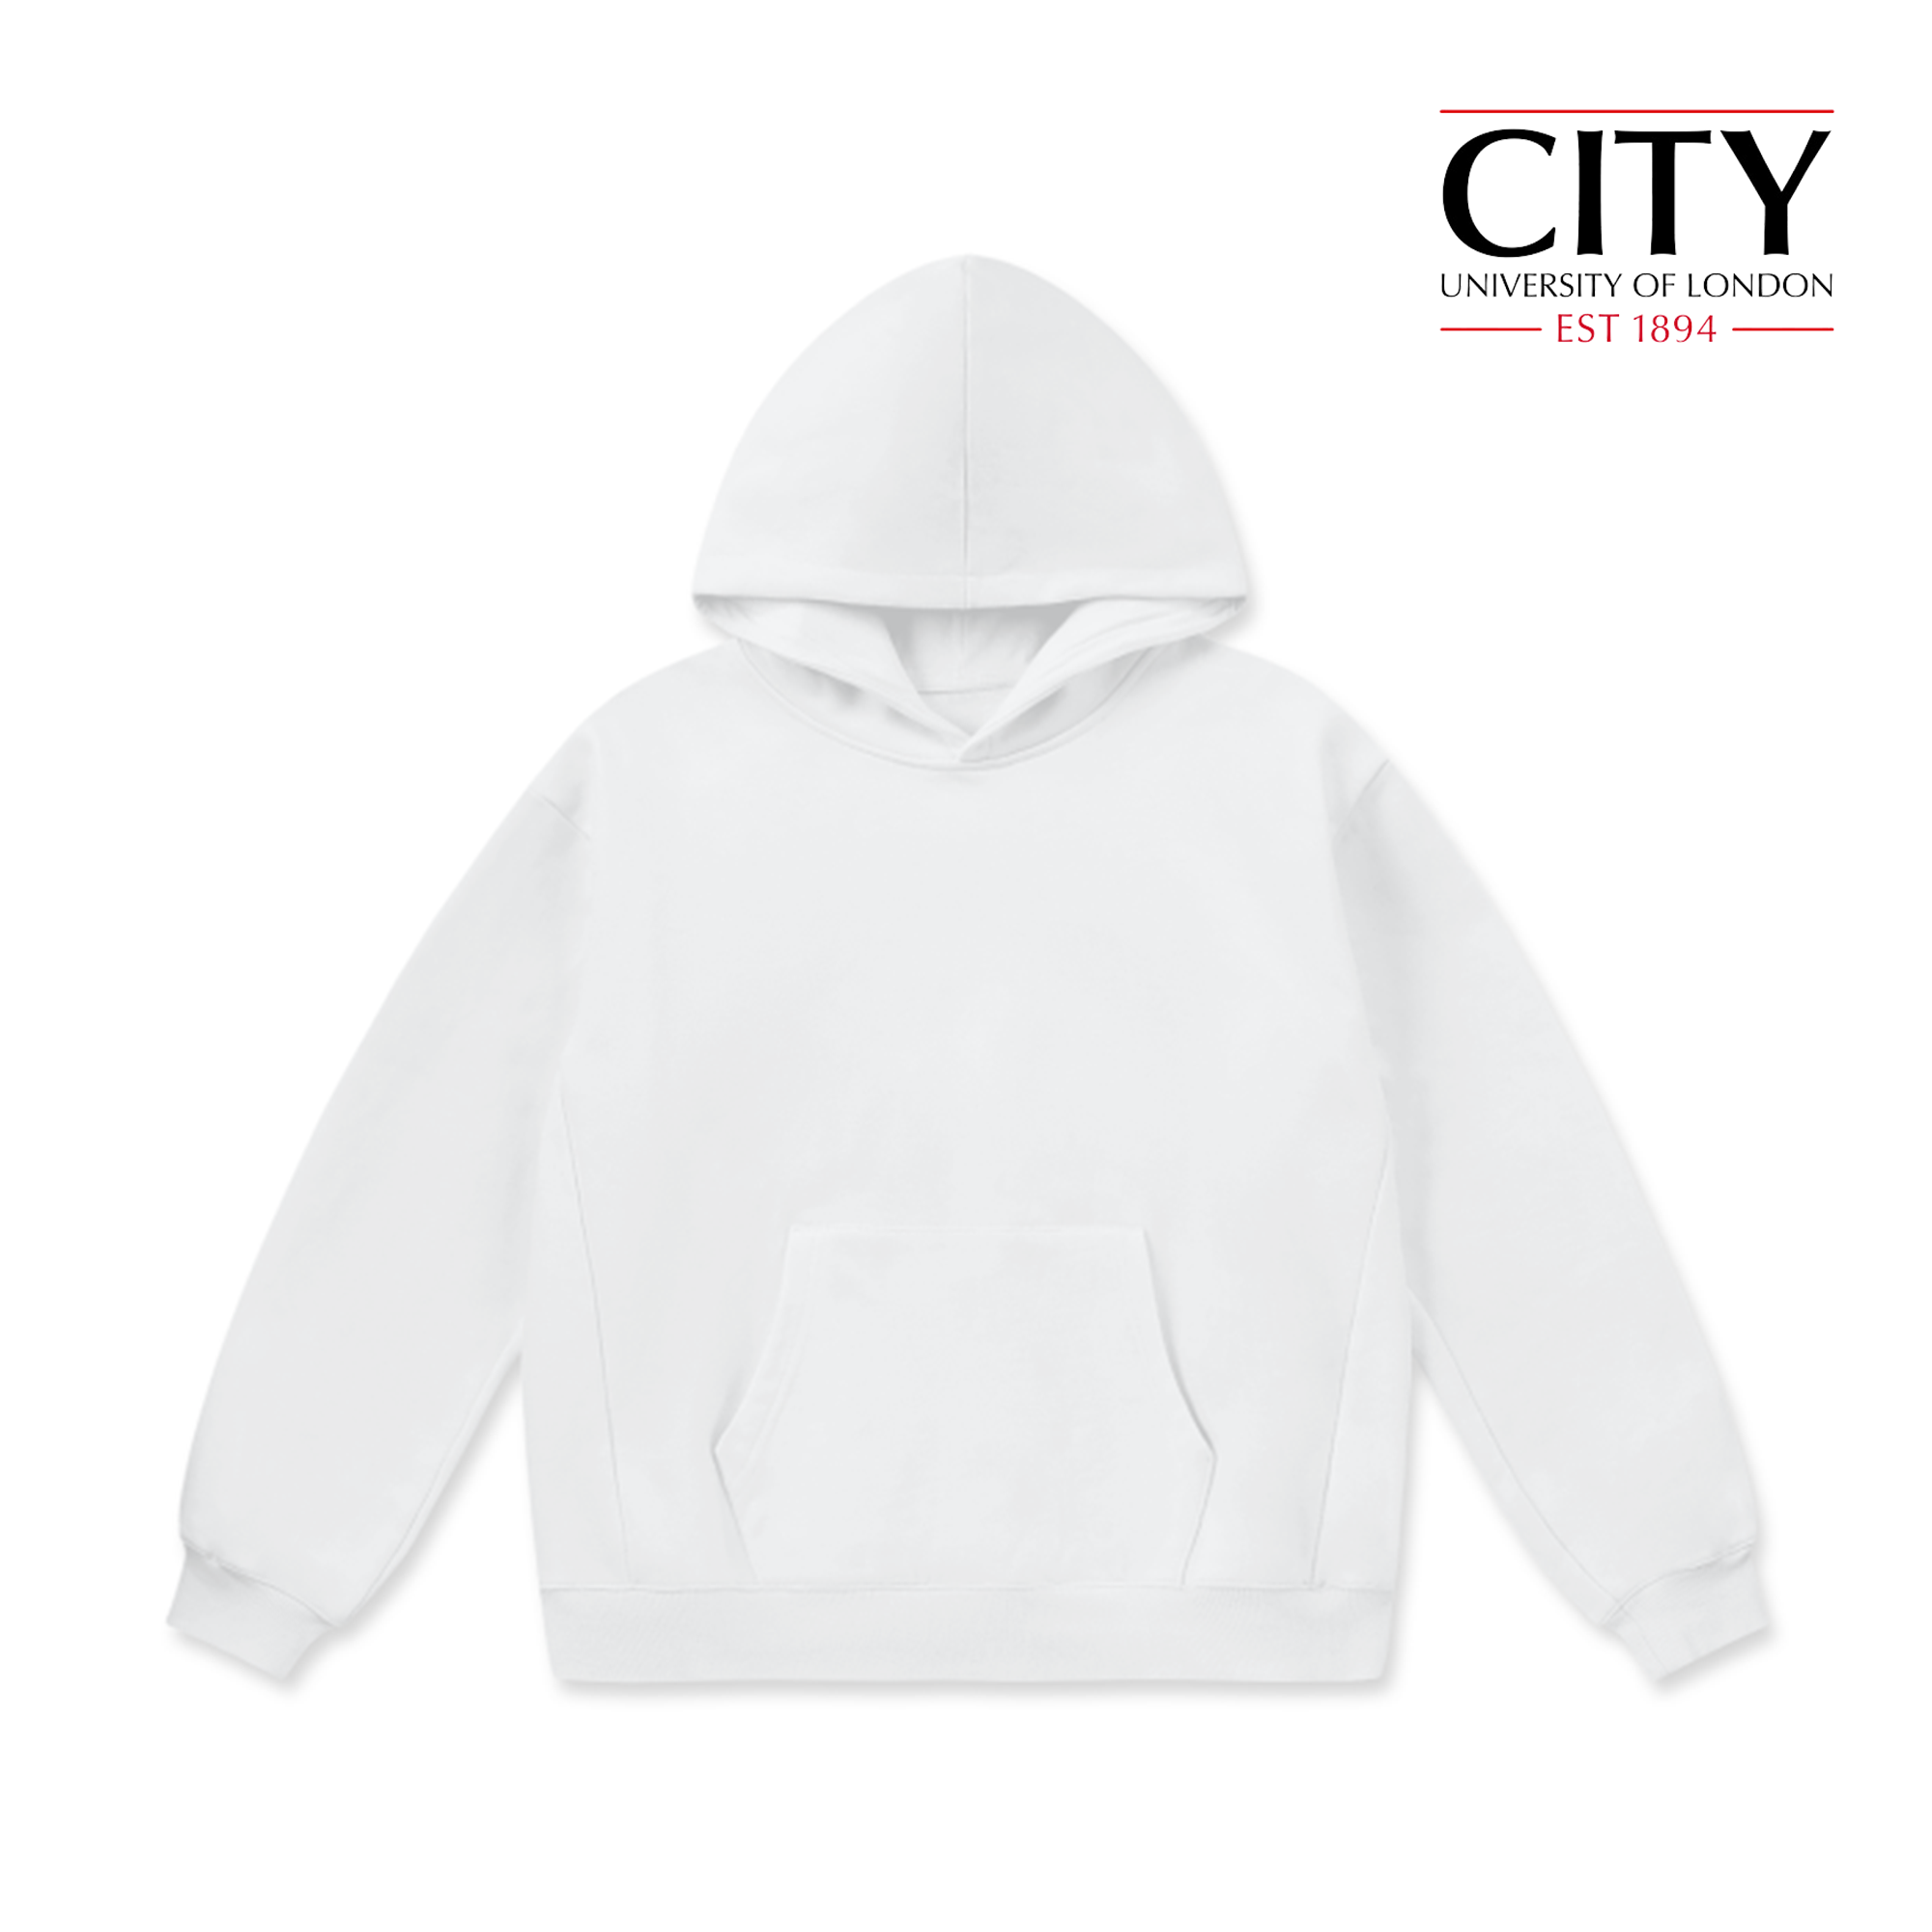 LCC Super Weighted Hoodie - City University of London (Modern)